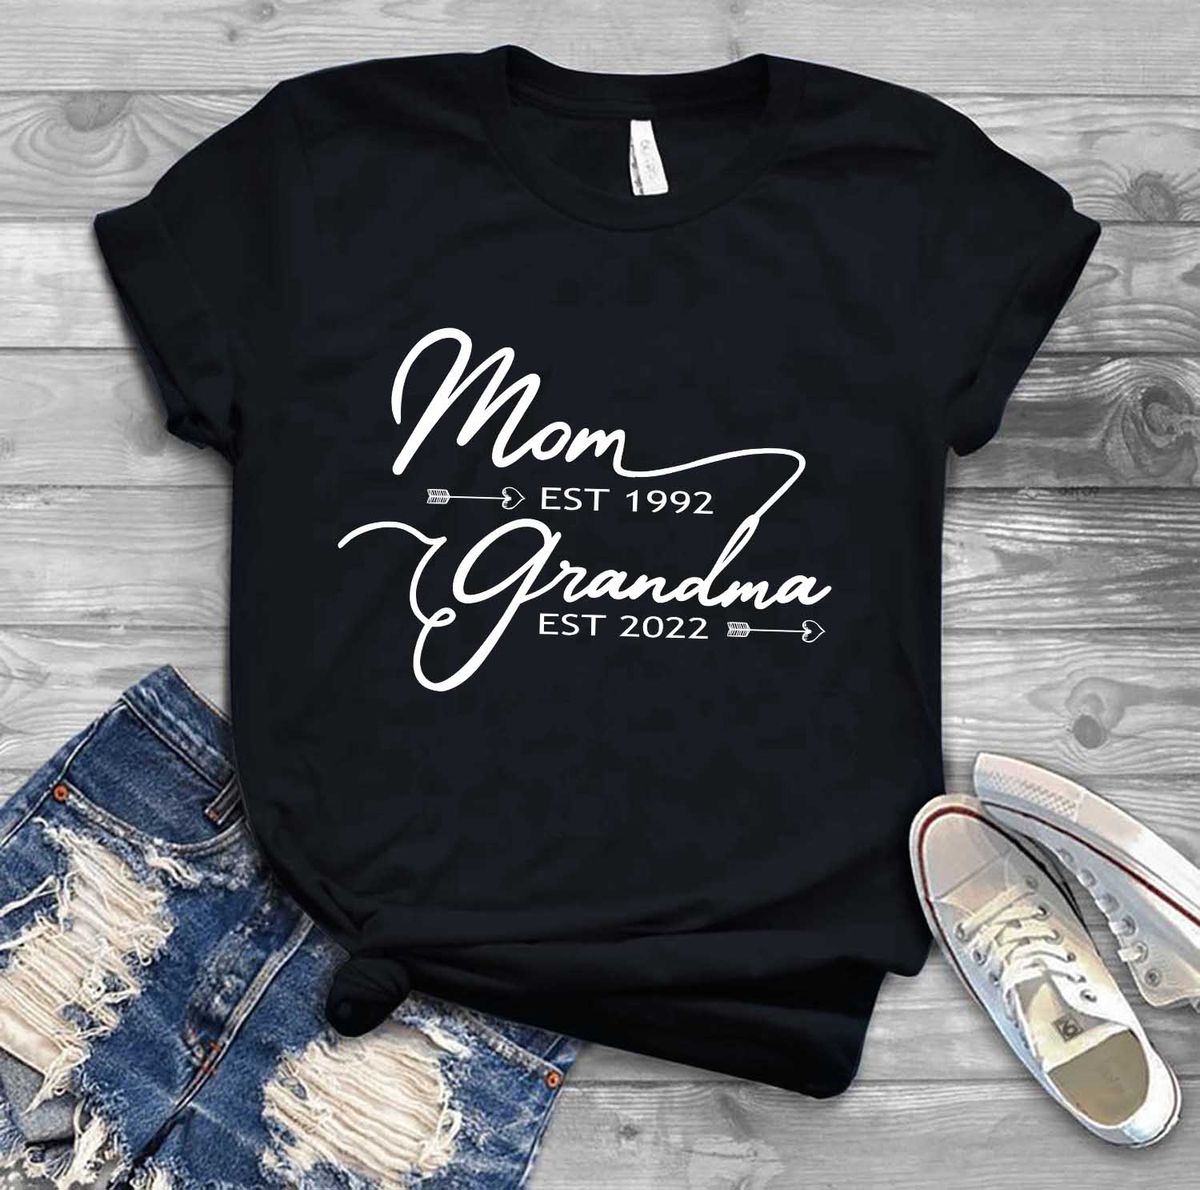 Mother's Day 2023 - Personalized Mother's Day Shirt, Mom Grandma Shirt, Nana Shirt Gift, Mother Grandma Birthday Gift_1